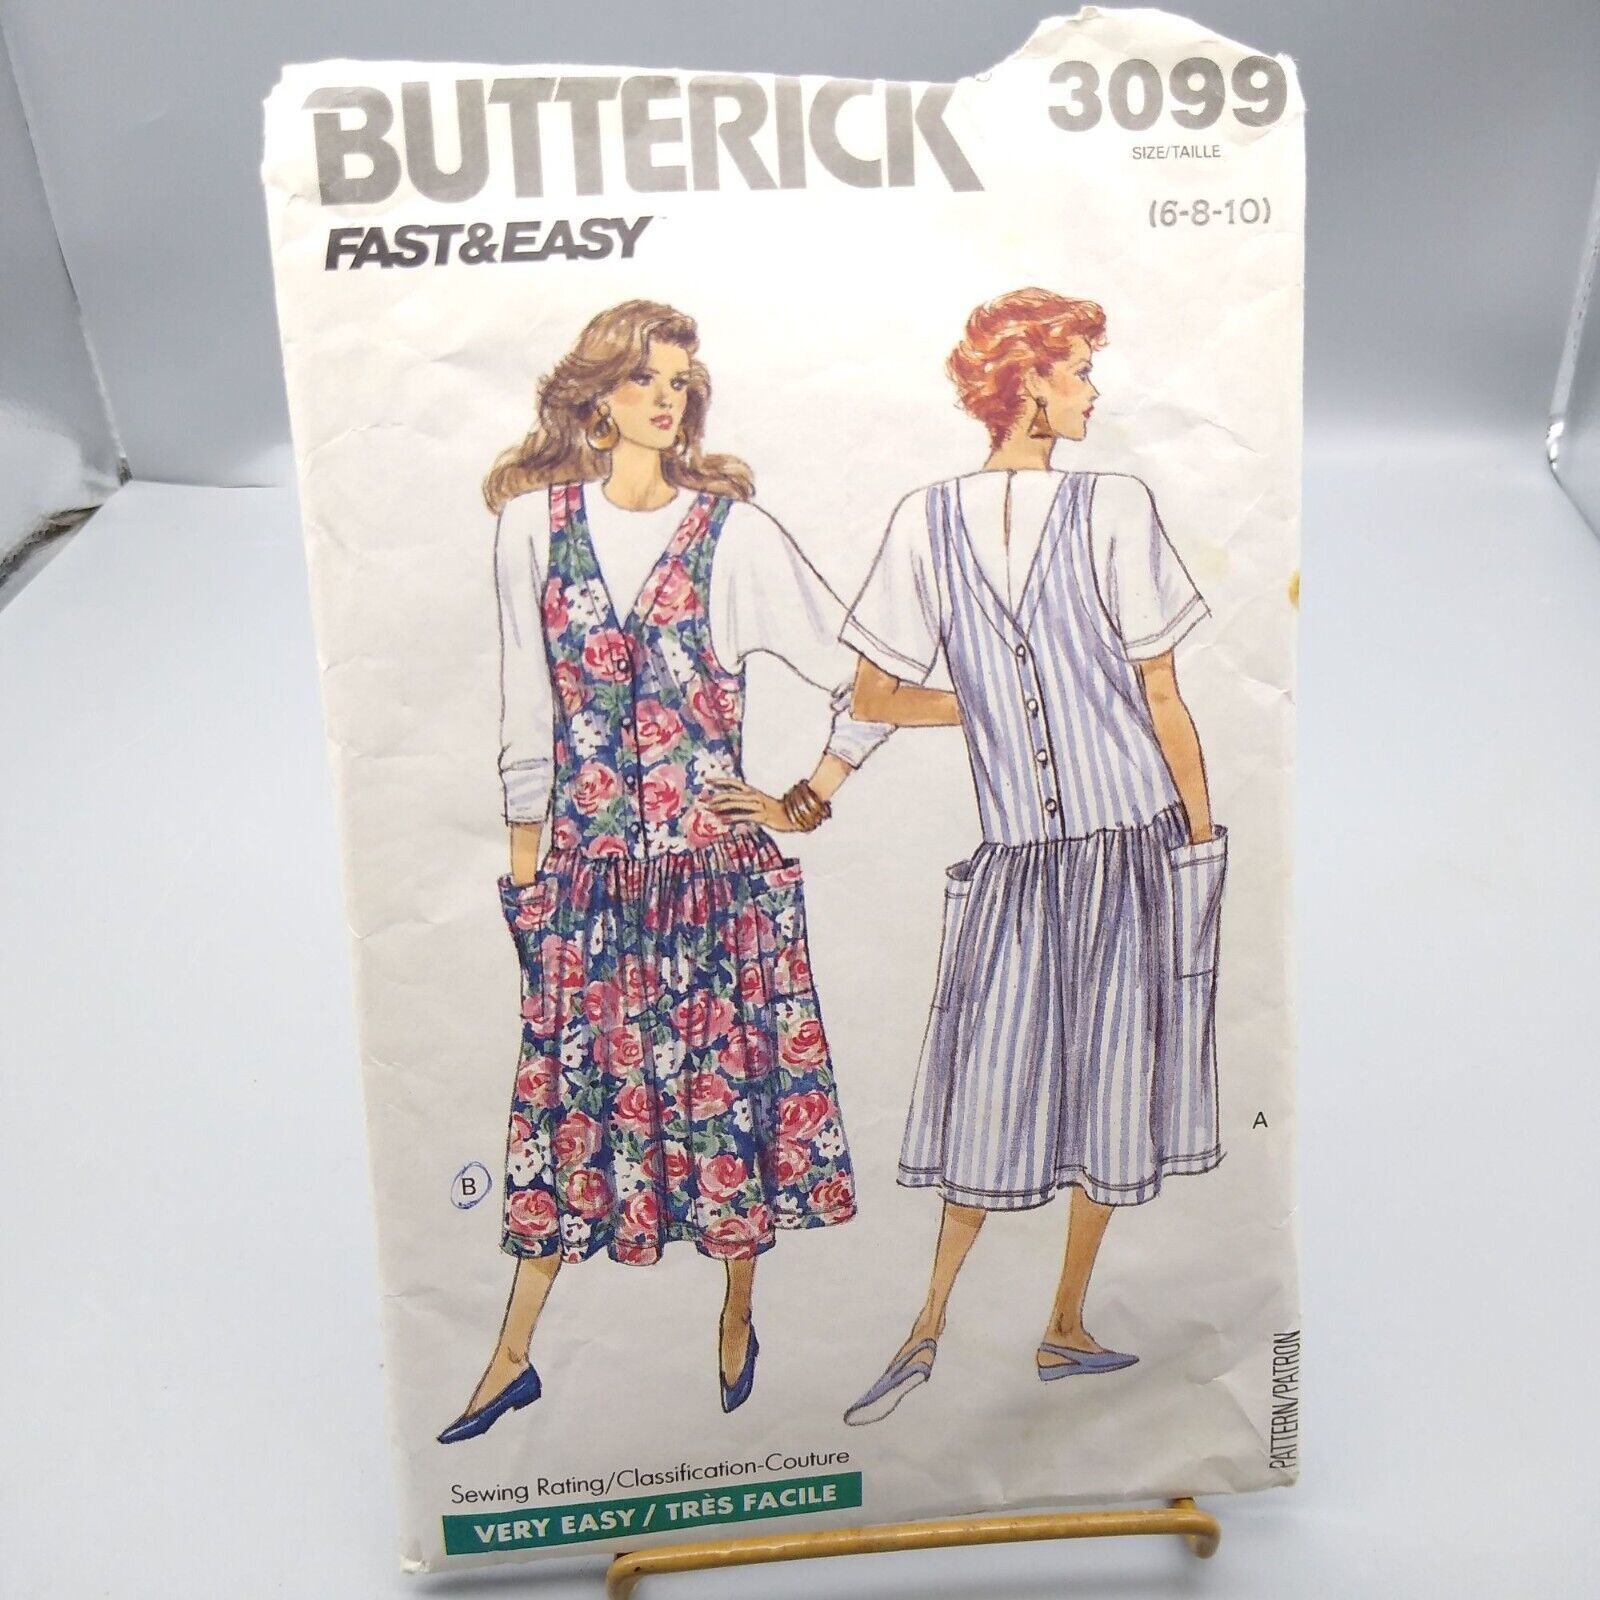 Vintage Sewing PATTERN Butterick 3099, Misses Fast and Easy 1989 Jumper and Top - $17.42